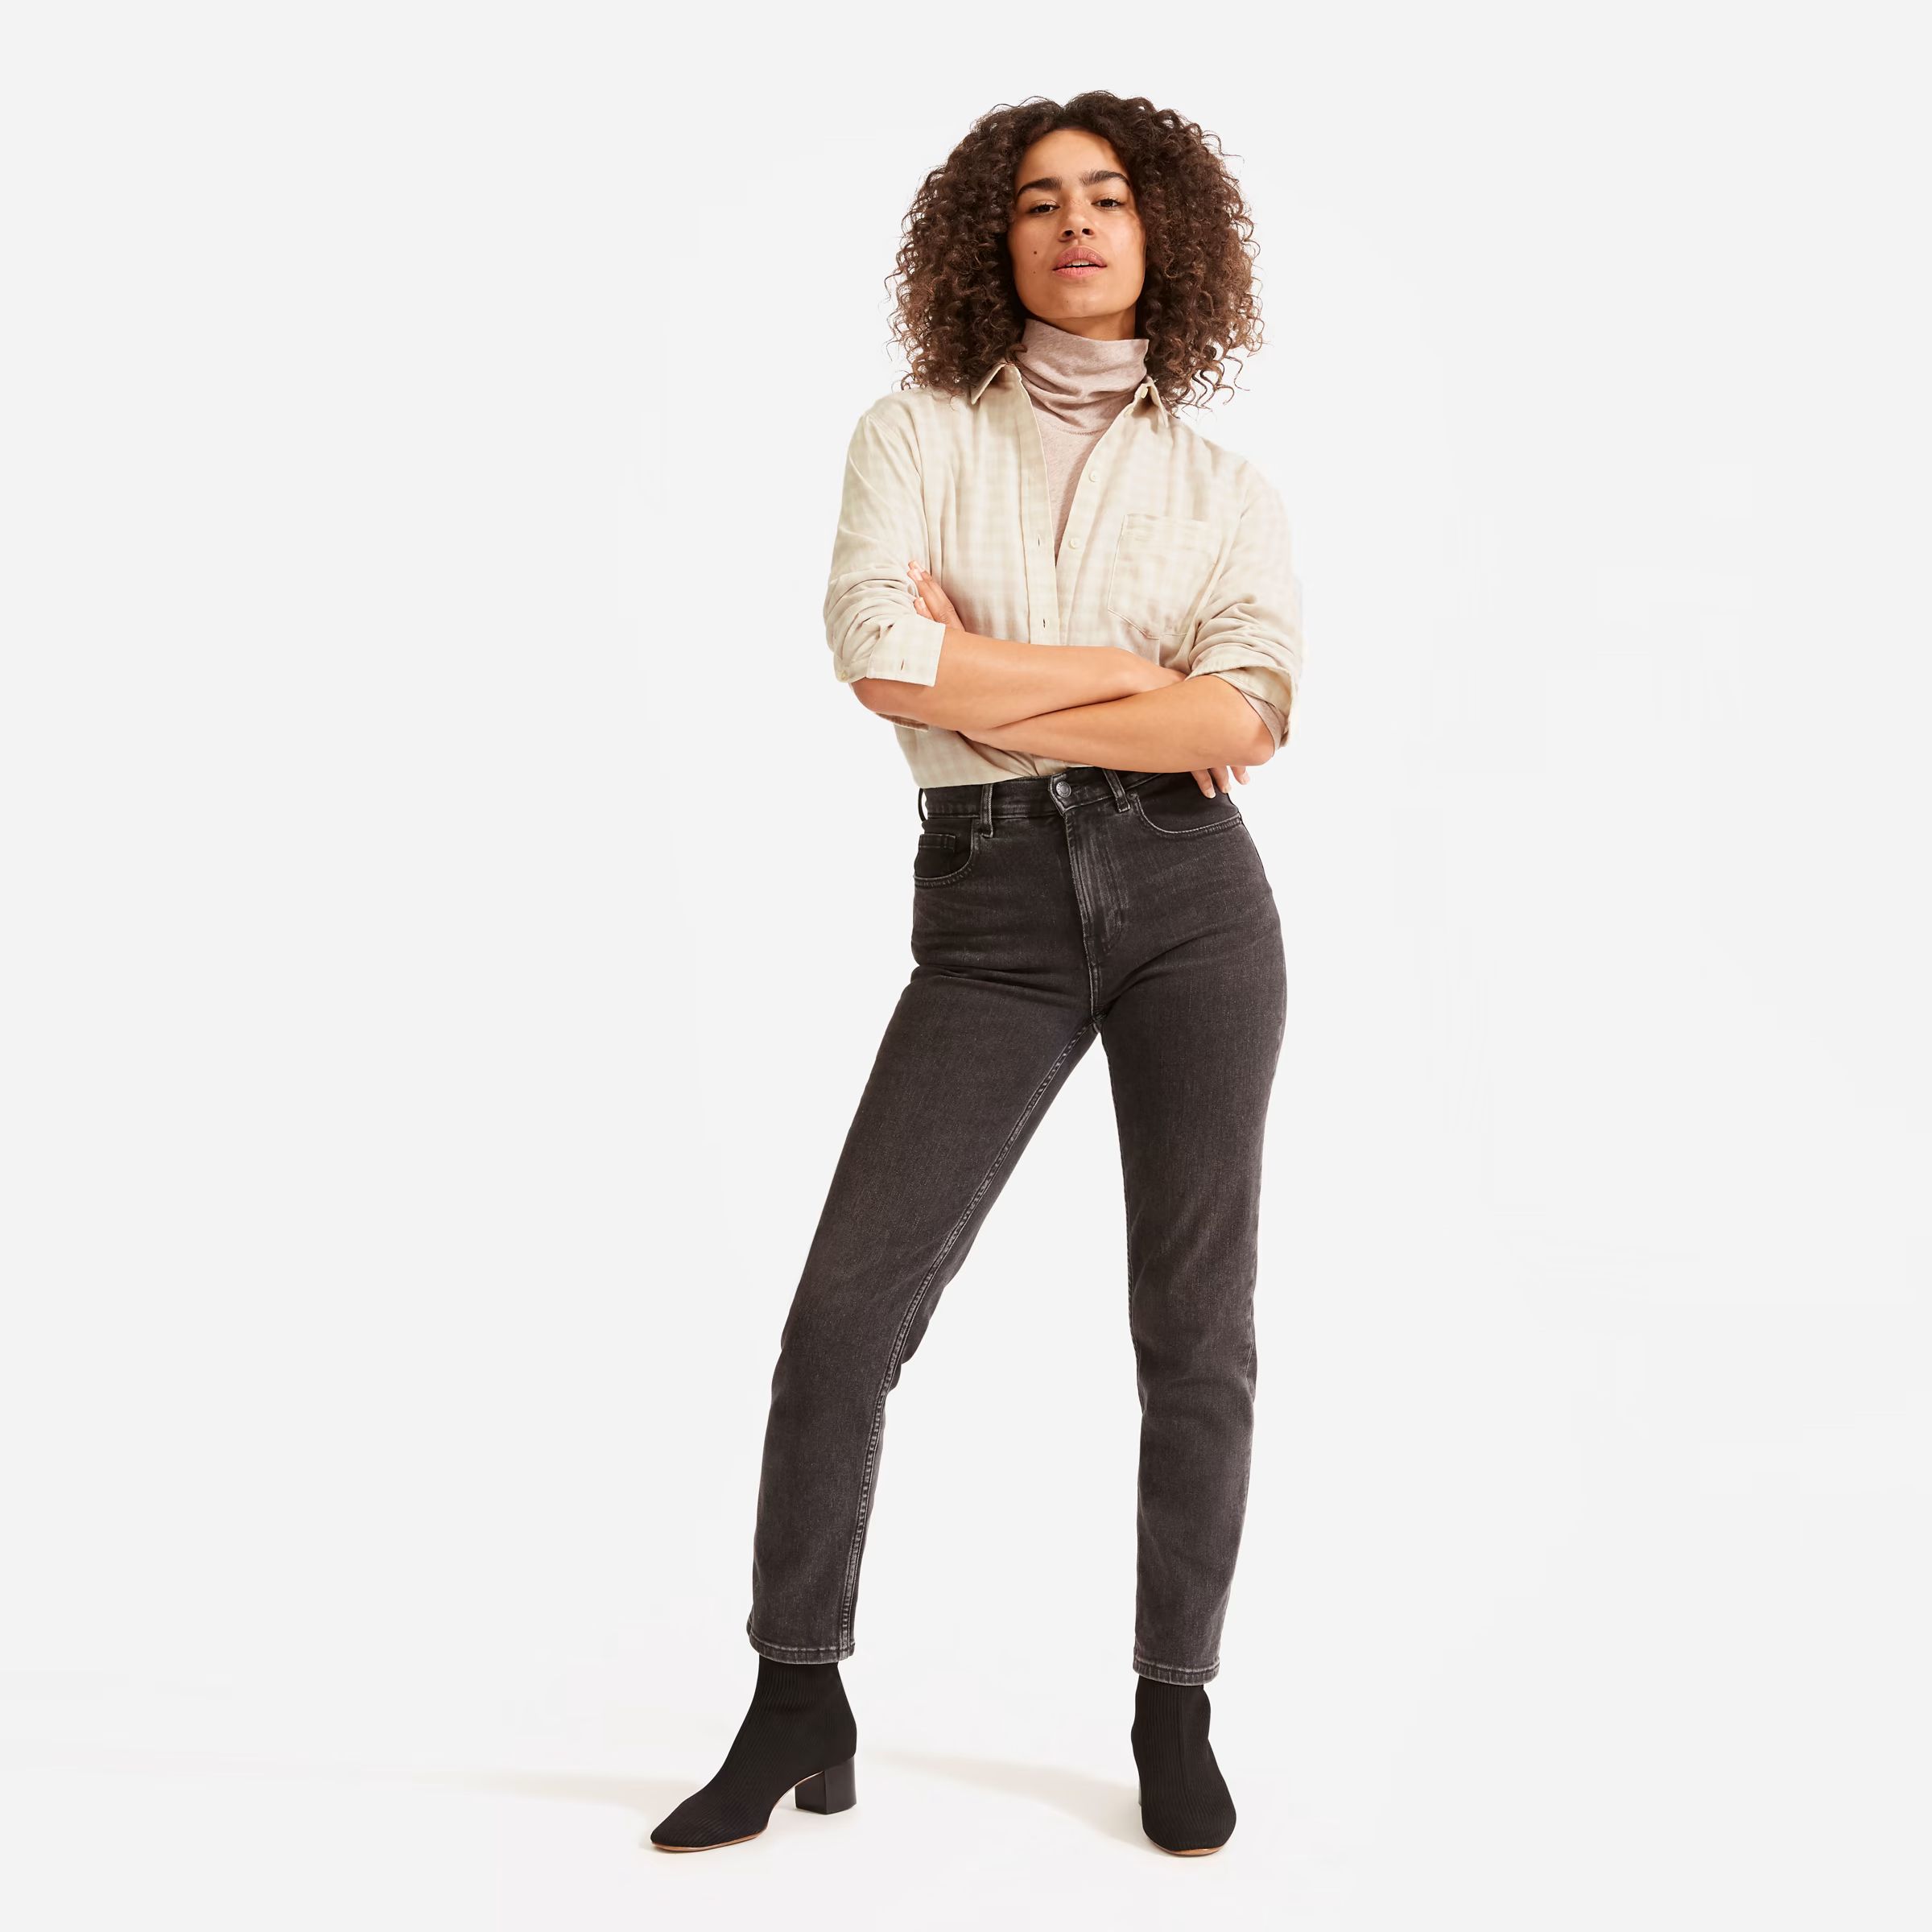 The Double-Gauze Relaxed Shirt | Everlane